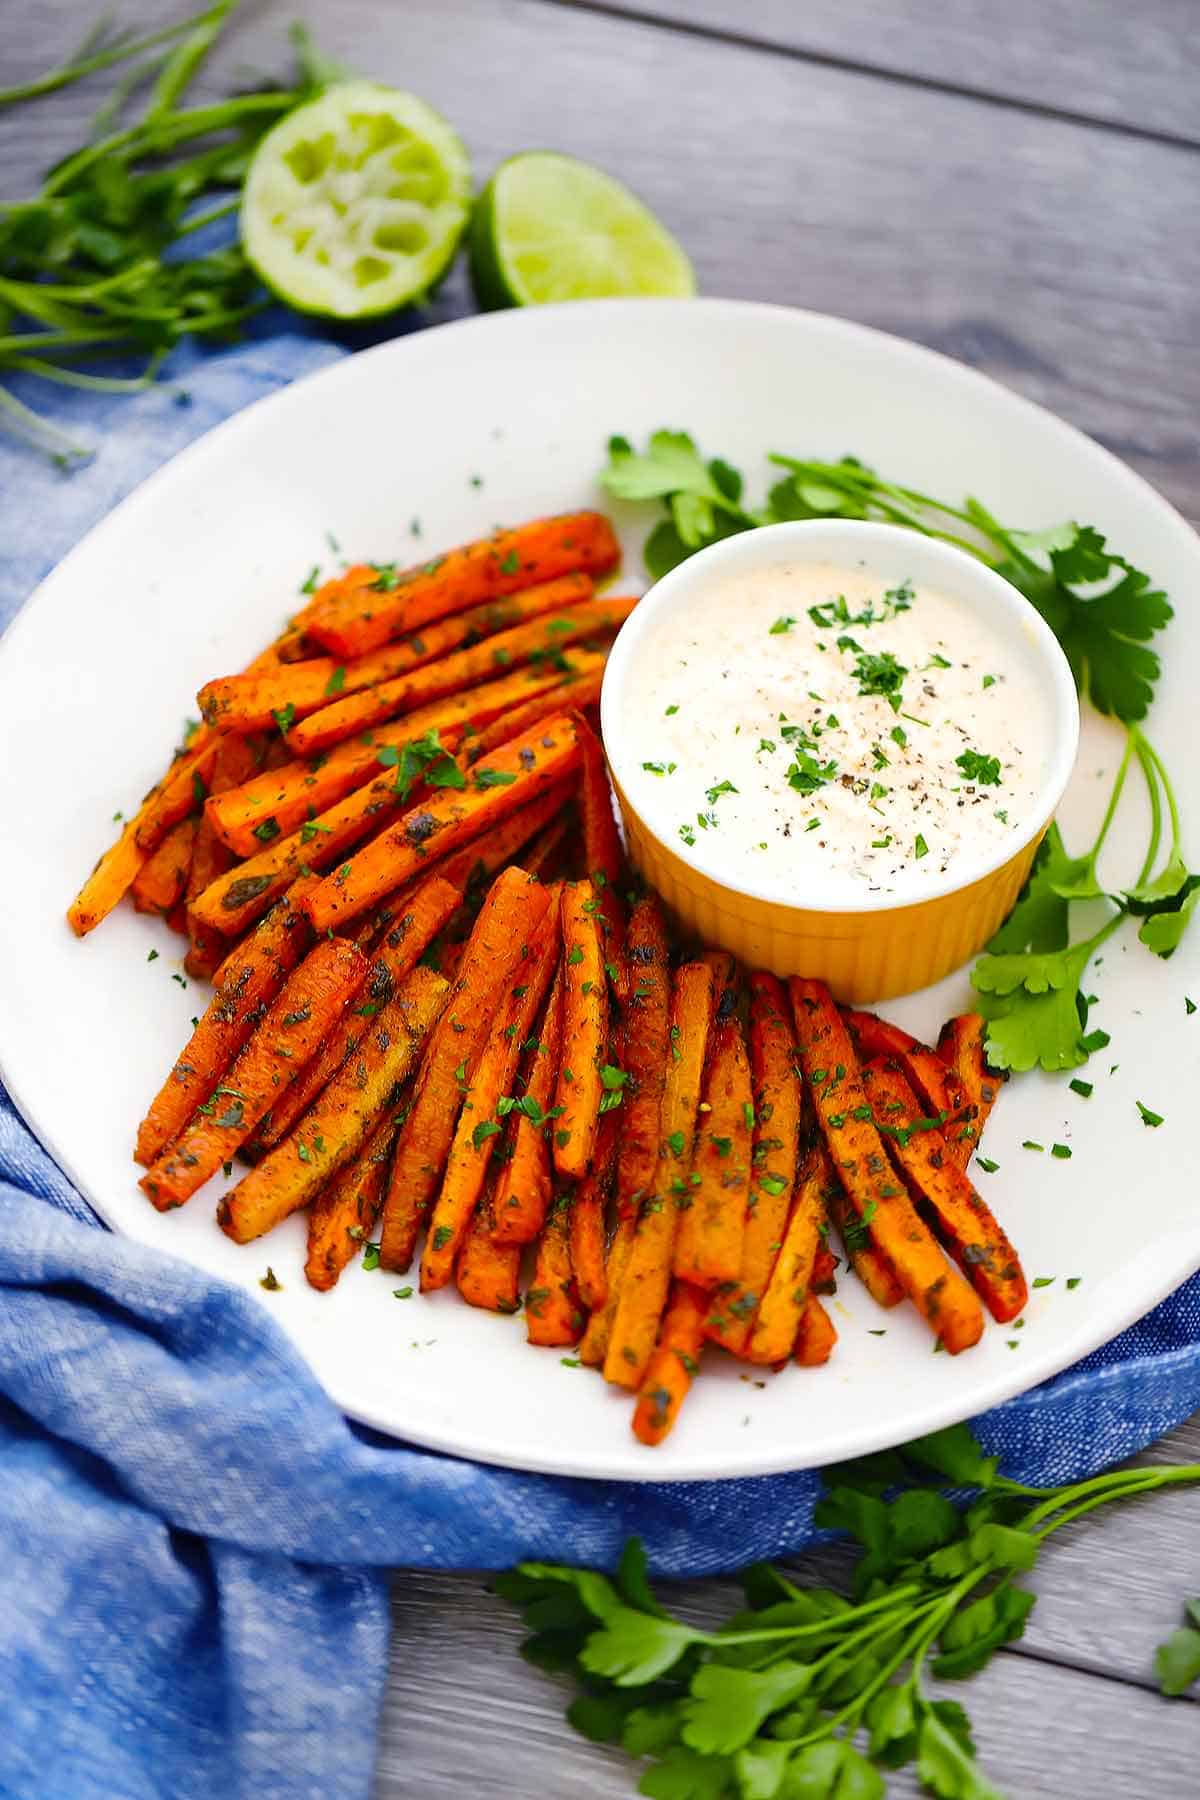 Carrot fries on a plate sprinkled with parsley and dipping sauce.